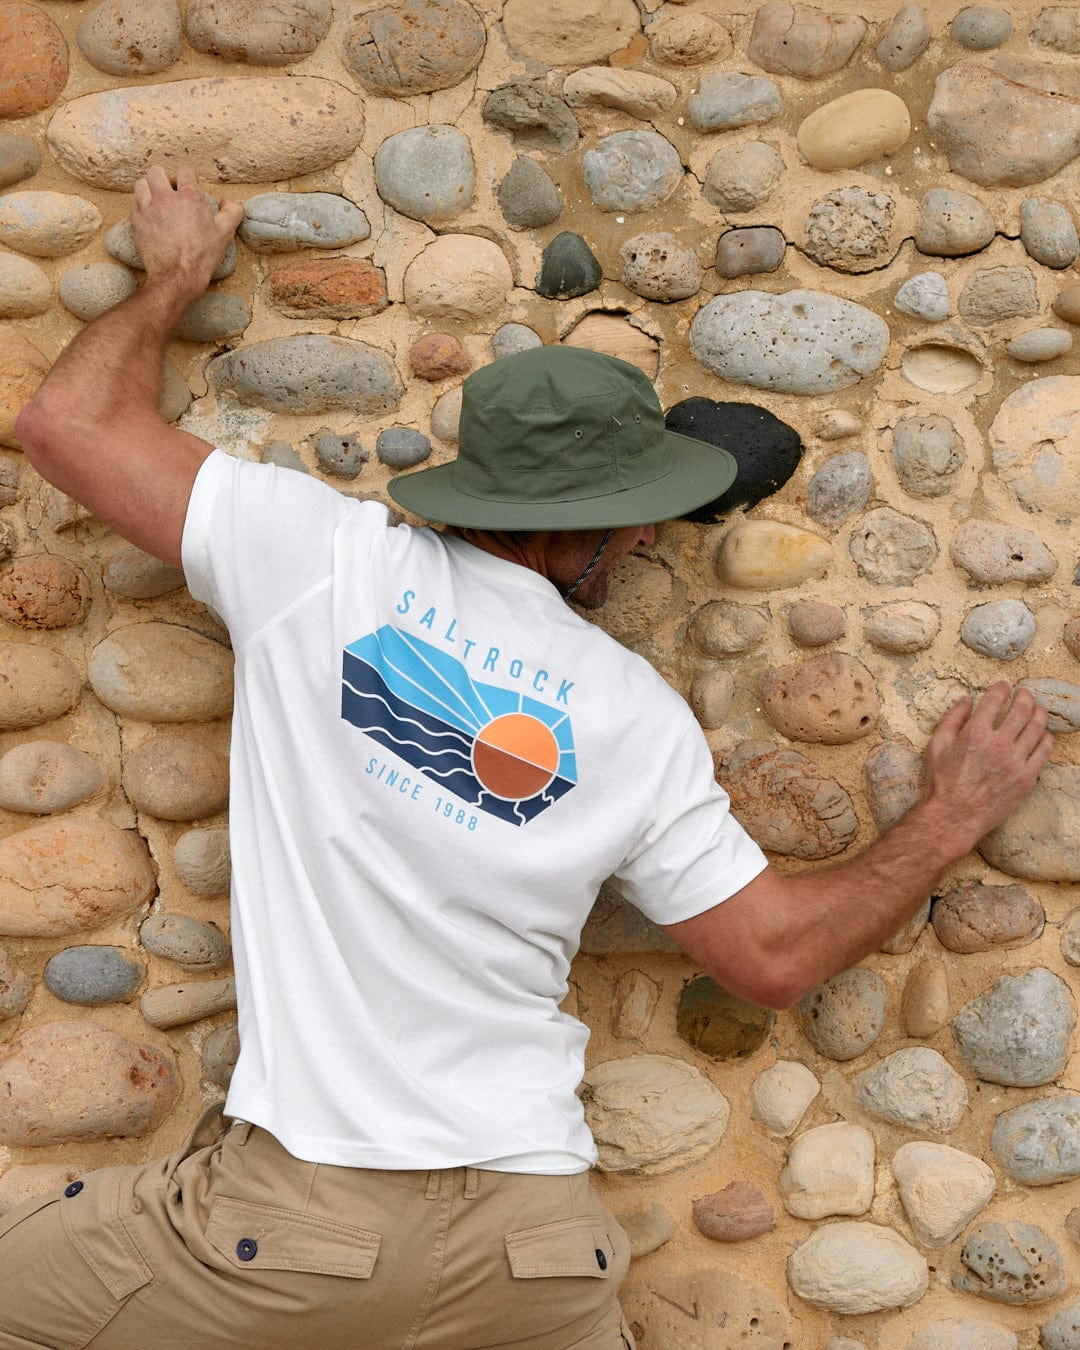 A man in a white t-shirt and tan pants wearing a Saltrock Green Gaitor bucket hat with an adjustable drawstring chin strap is attempting to climb a wall made of rounded stones.